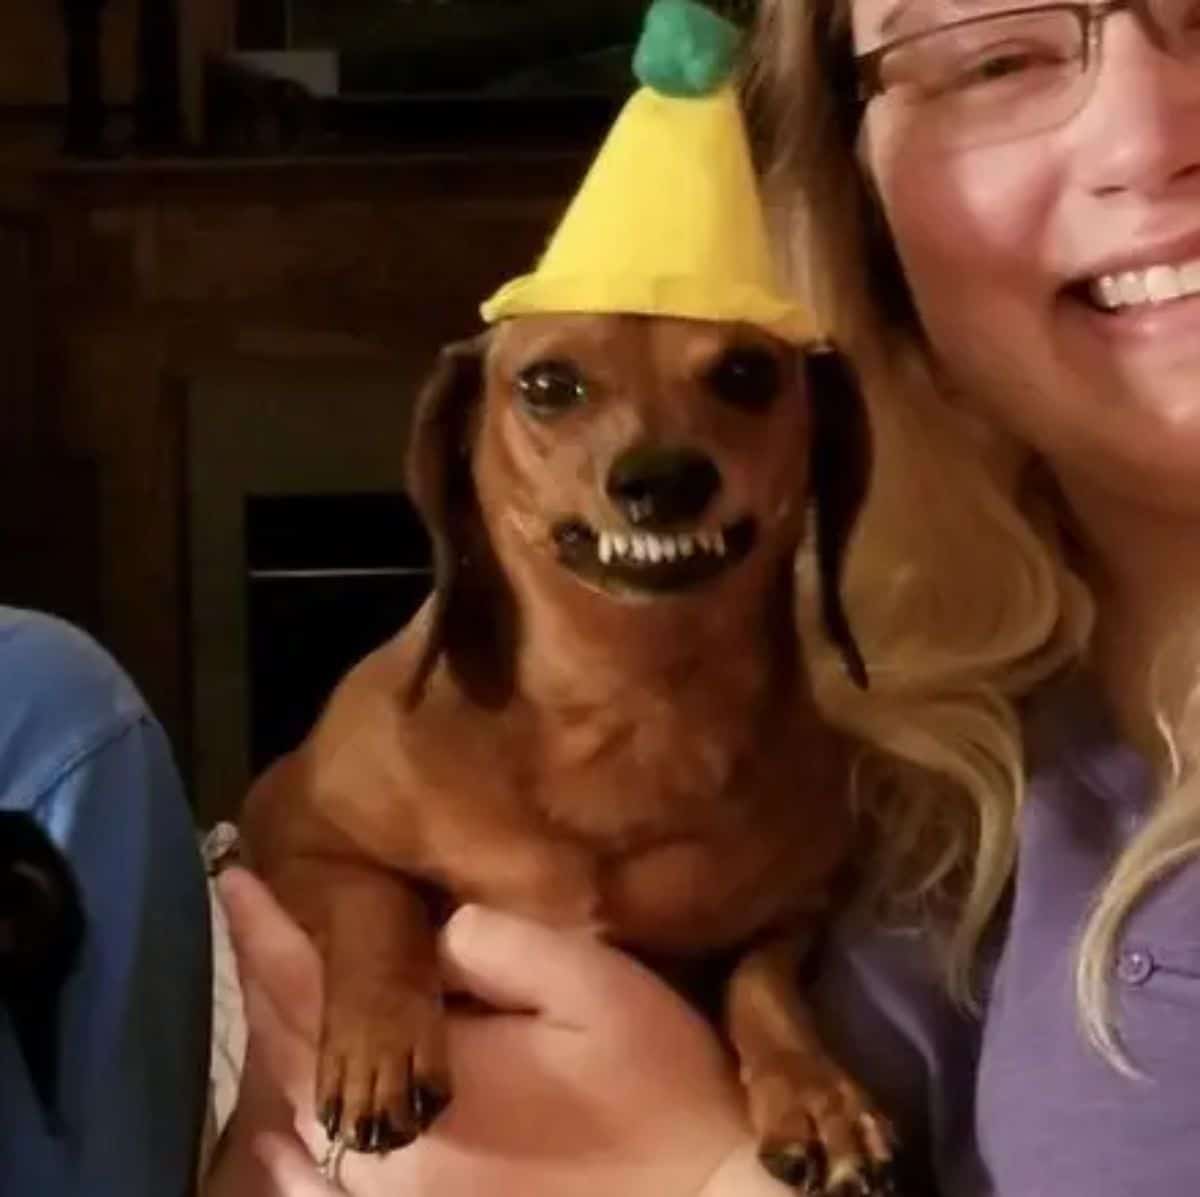 brown dachshund wearing a yellow party hat with a green bobble at the top being held by someone and the dog is snarling showing its teeth